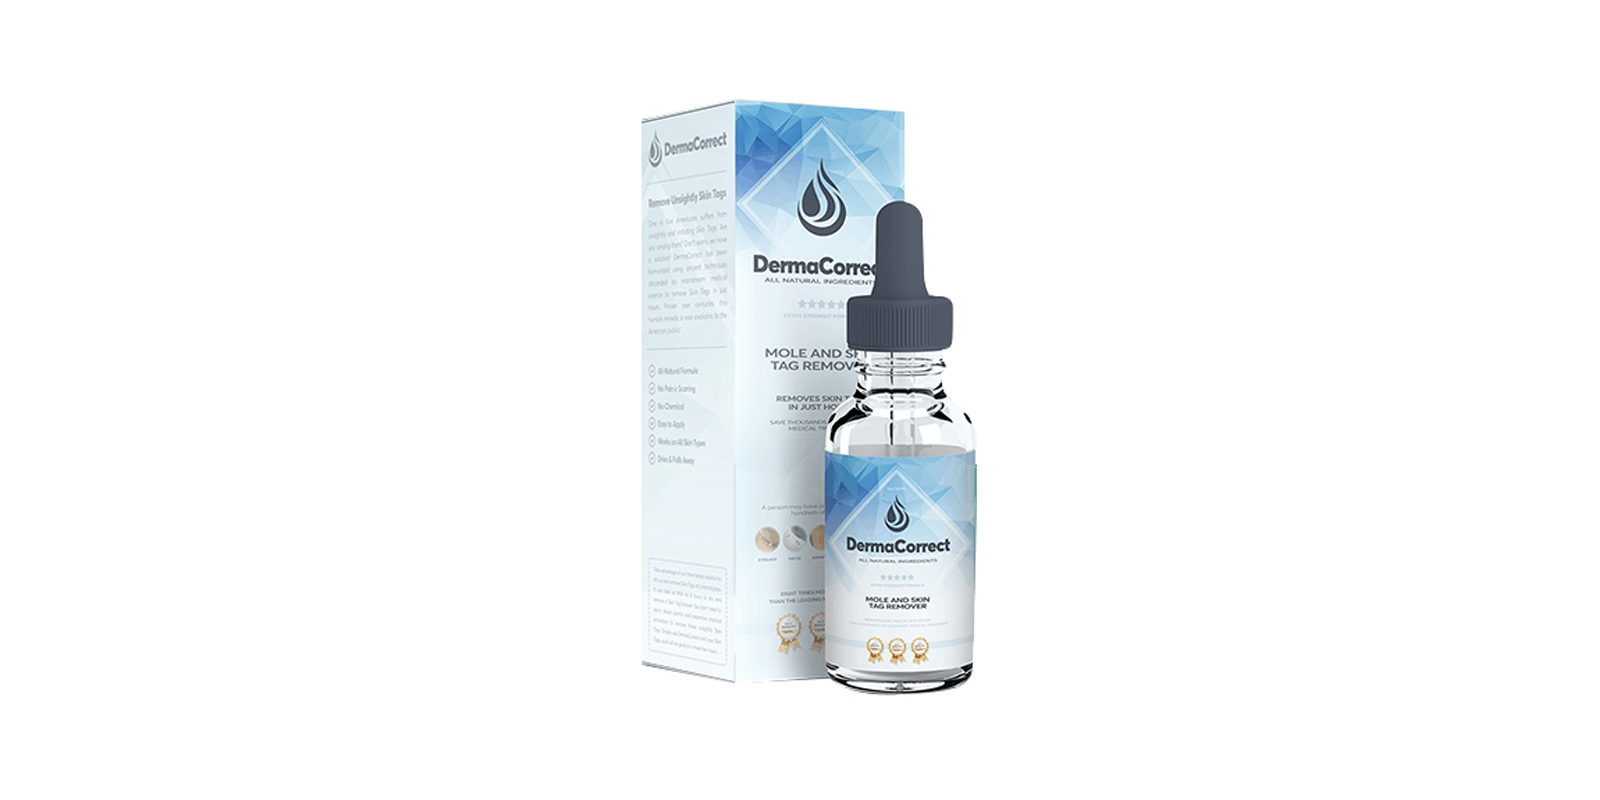 Derma-Correct-review